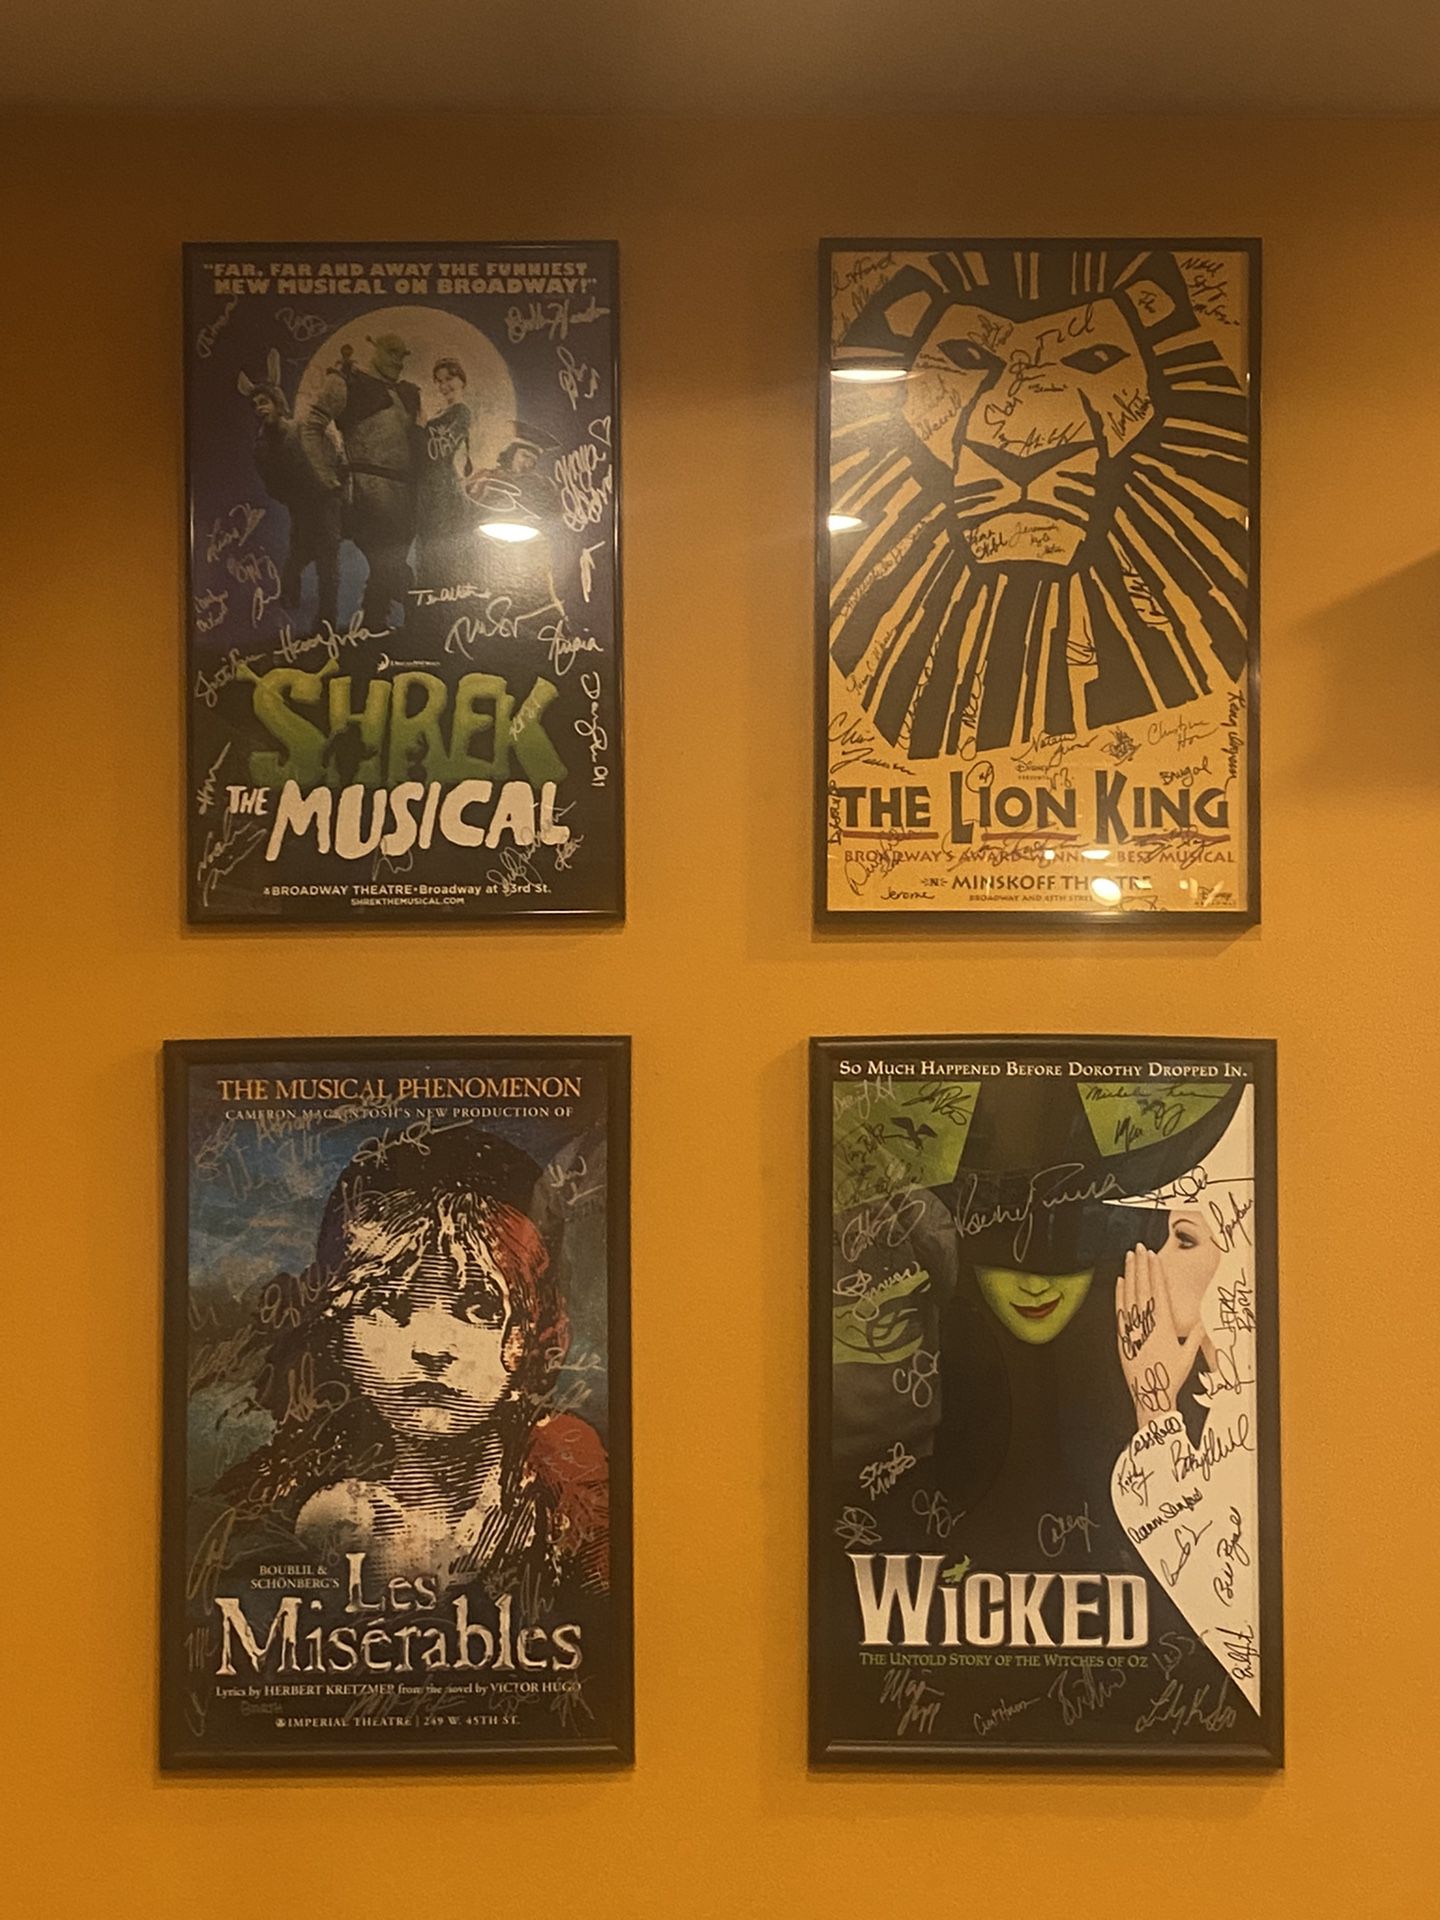 5 Signed Broadway Posters 